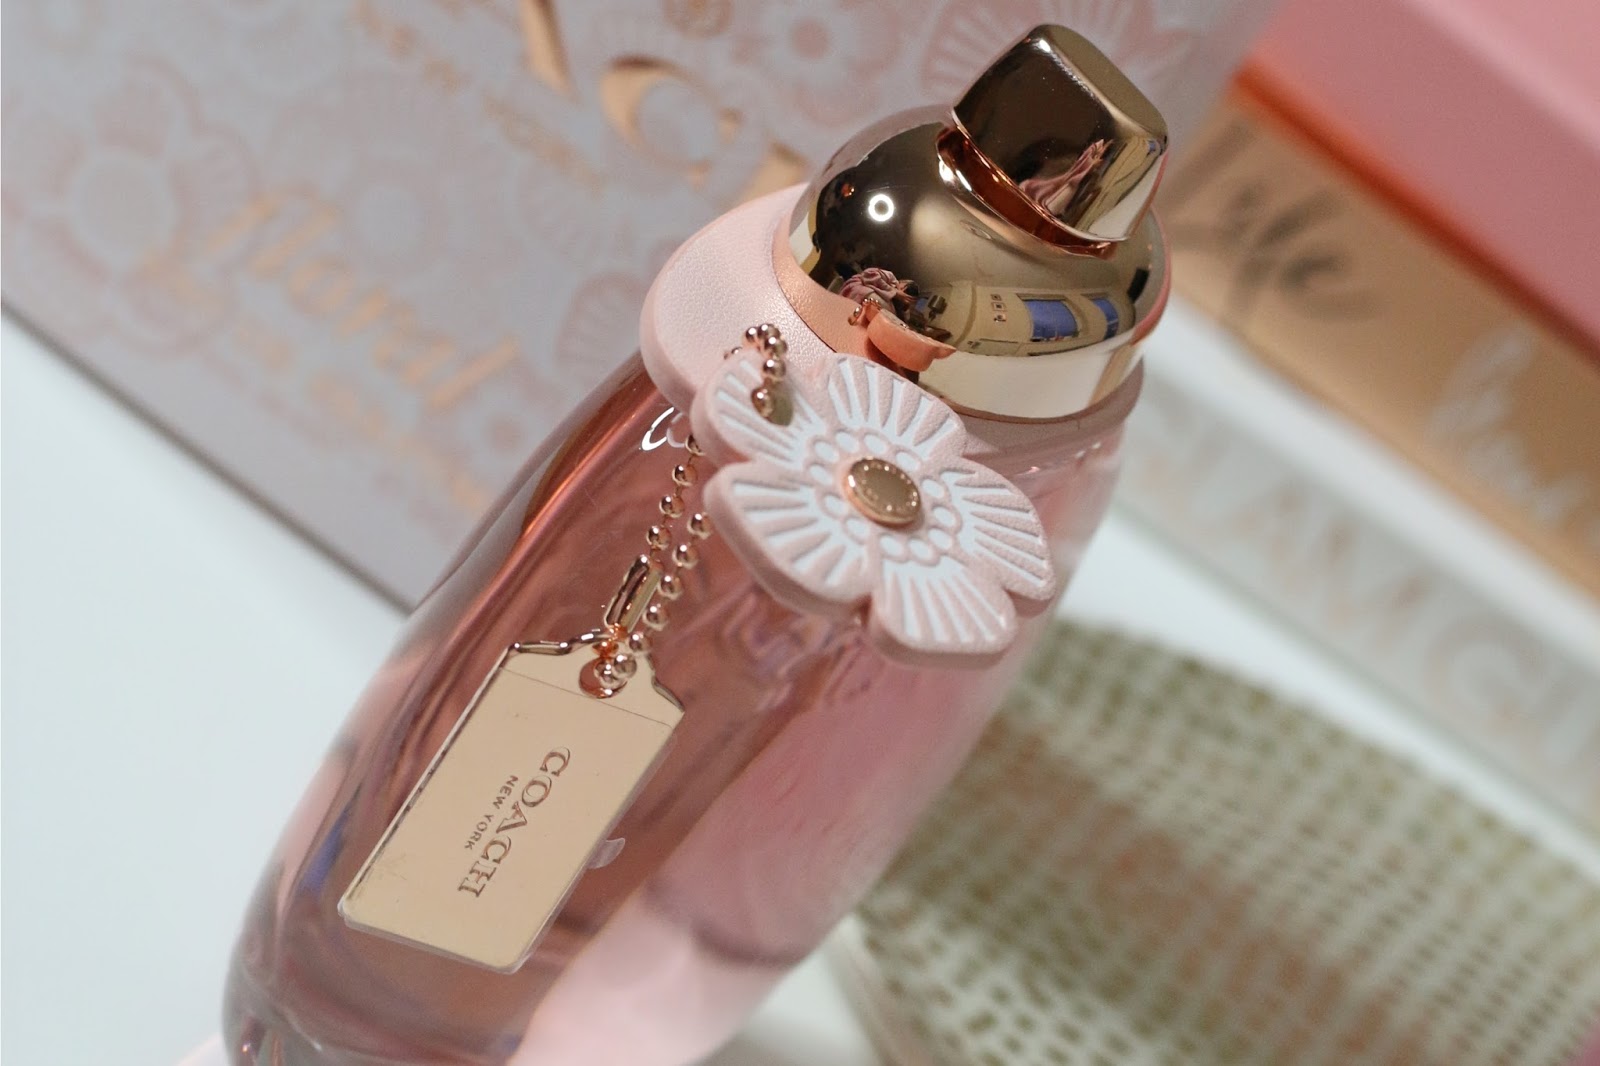 Coach Floral Fragrance Review by UK Perfume Beauty Blogger WhatLauraLoves